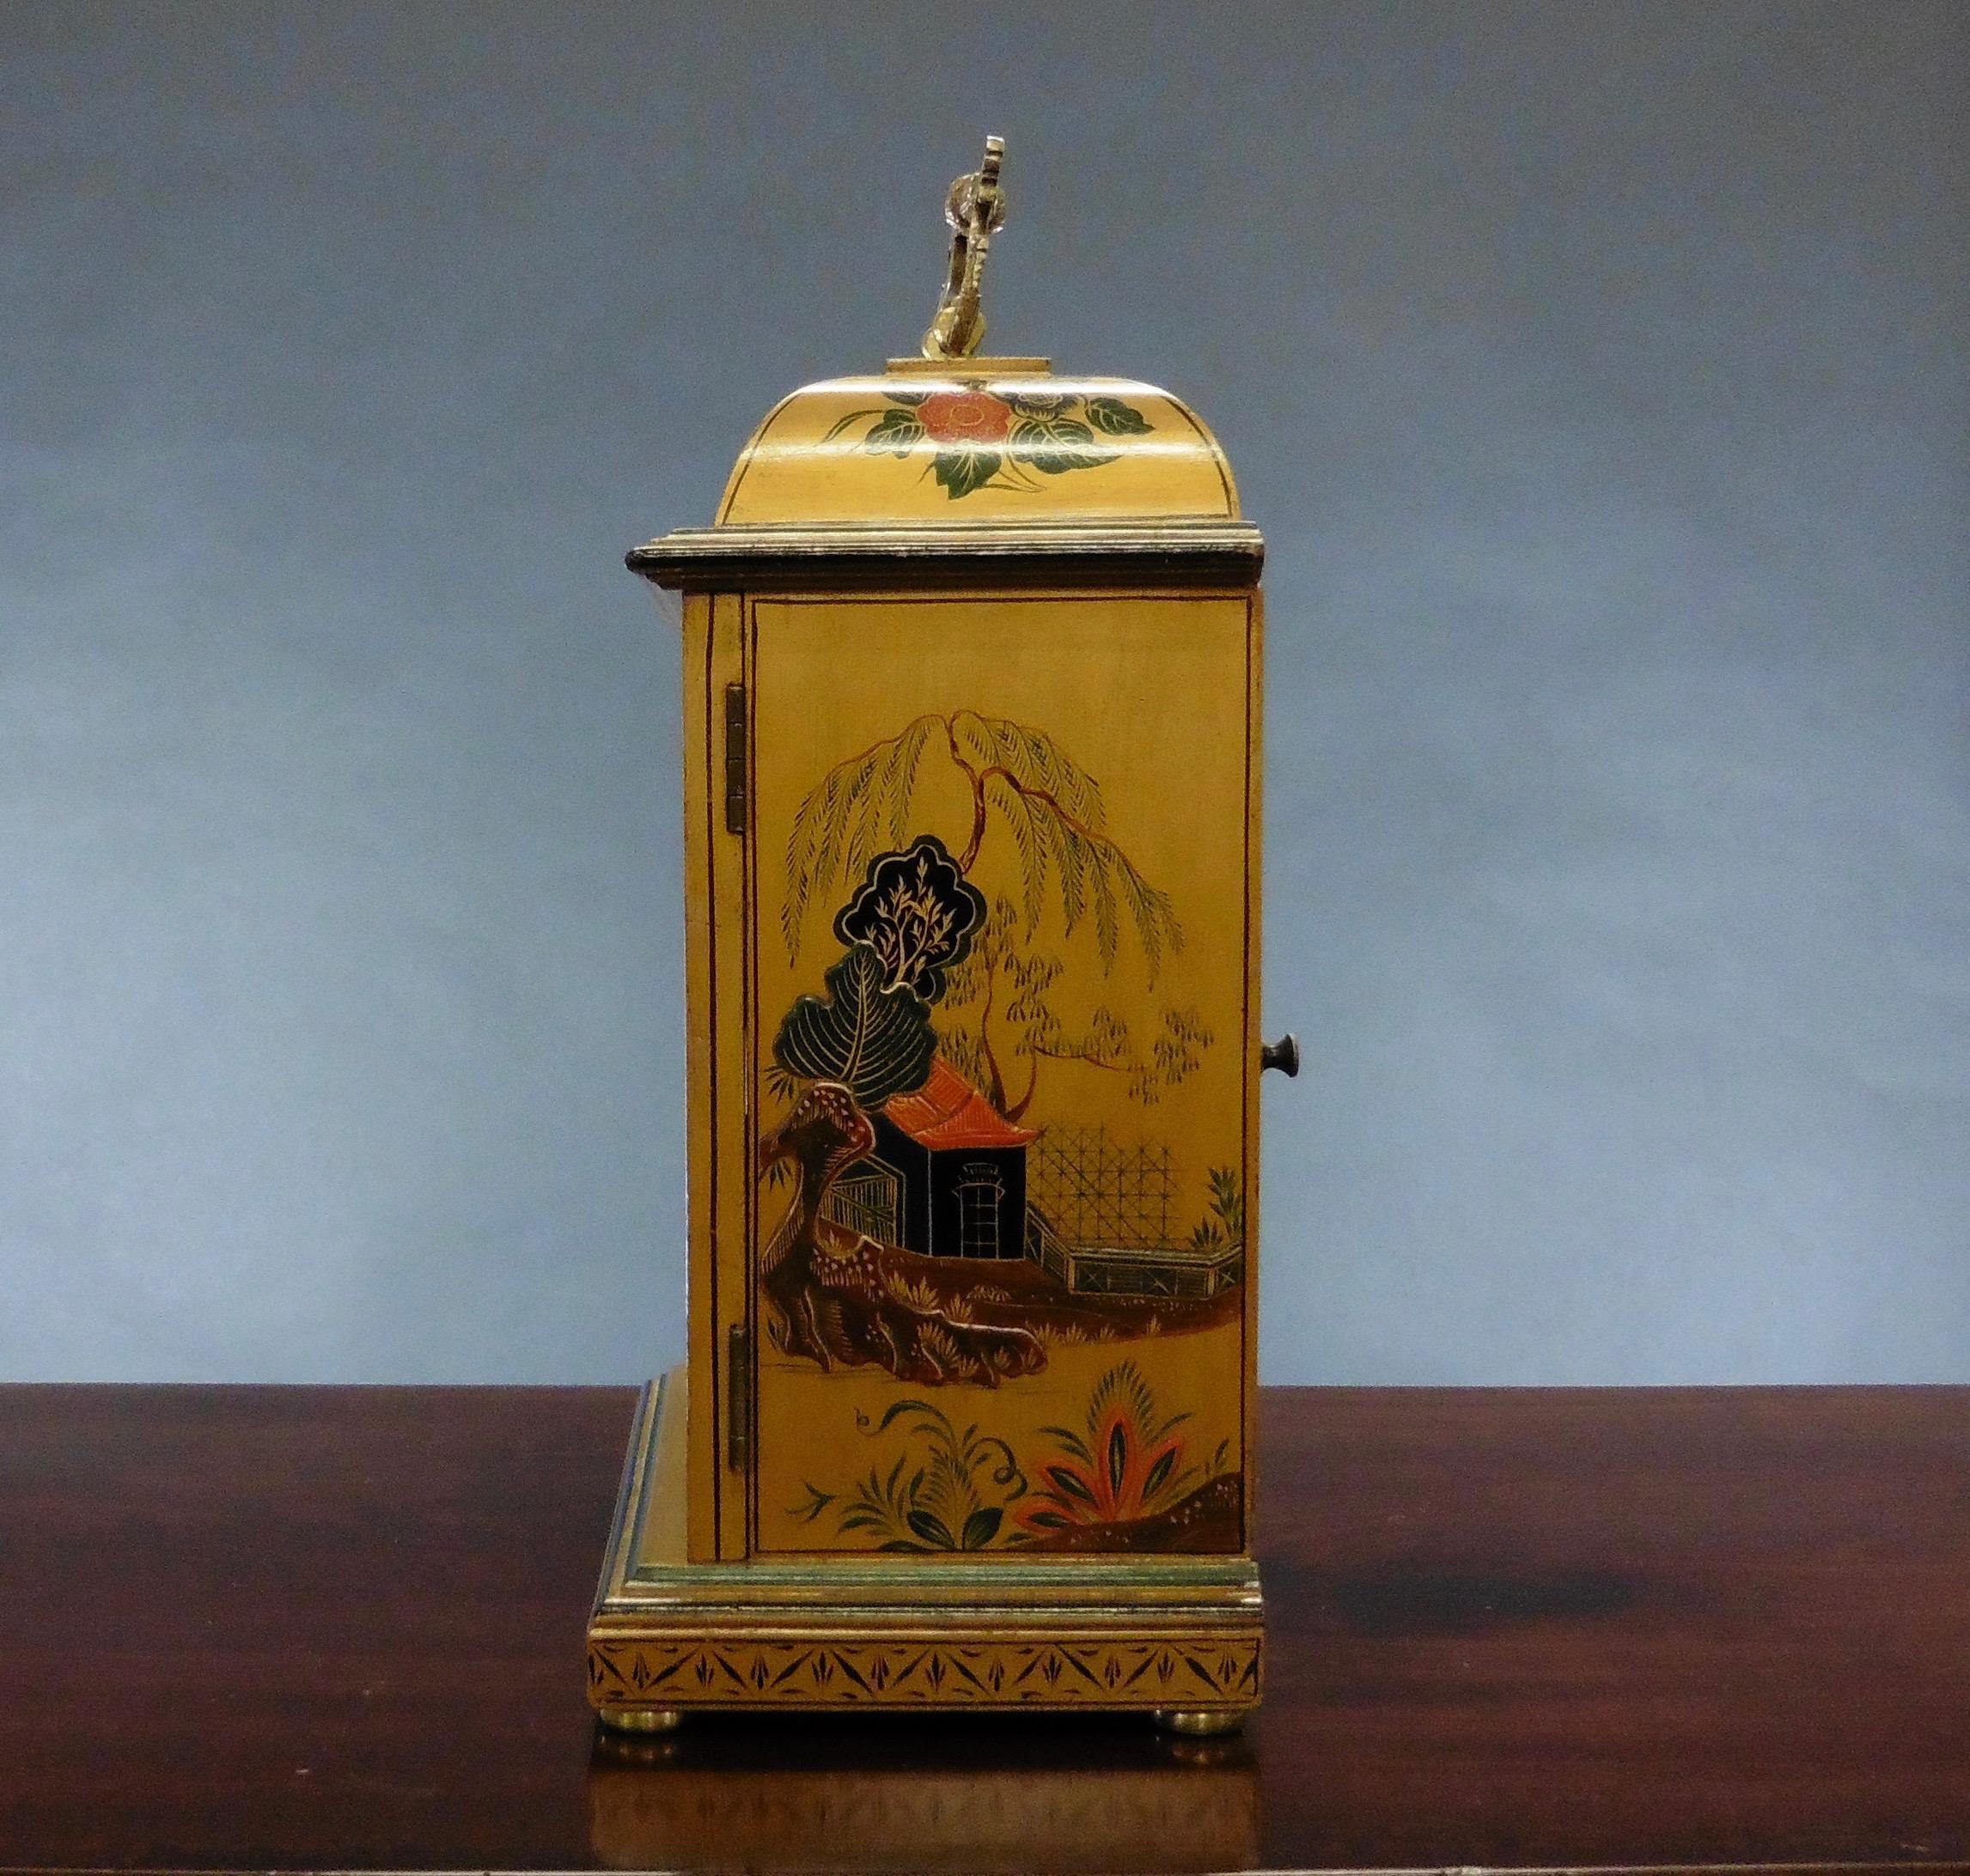 Fine bell top mantel clock standing on a raised, moulded plinth and resting on brass bun feet with ornate brass carrying handle. 

Beautifully decorated case with chinoiserie work on a gilded ground. Silvered chapter ring with Roman numerals and